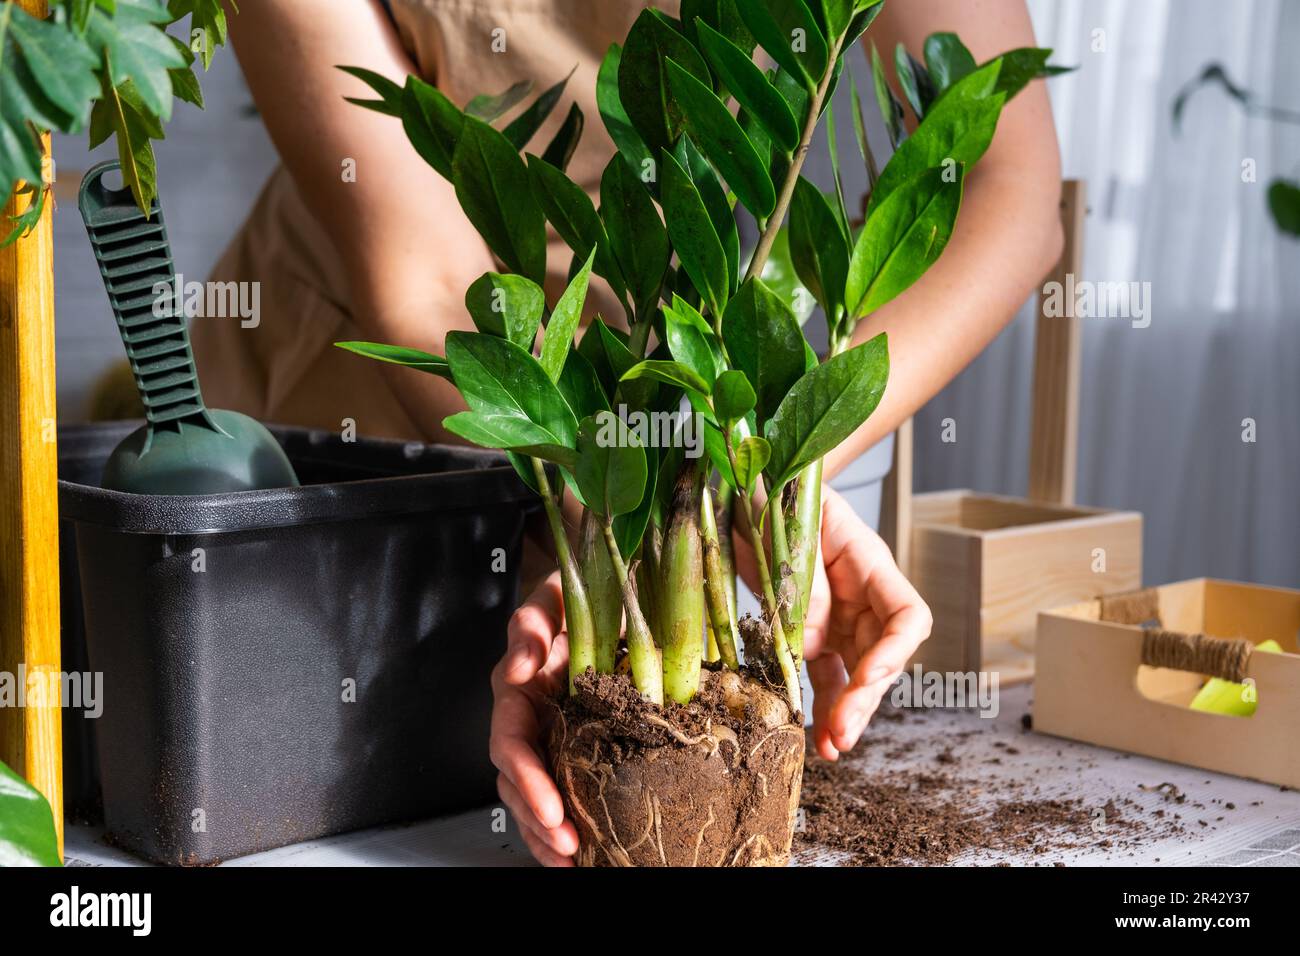 Repotting overgrown home plant succulent Zamioculcas with a lump of roots and bulb into new bigger pot. Caring for potted plant, hands of woman in apr Stock Photo